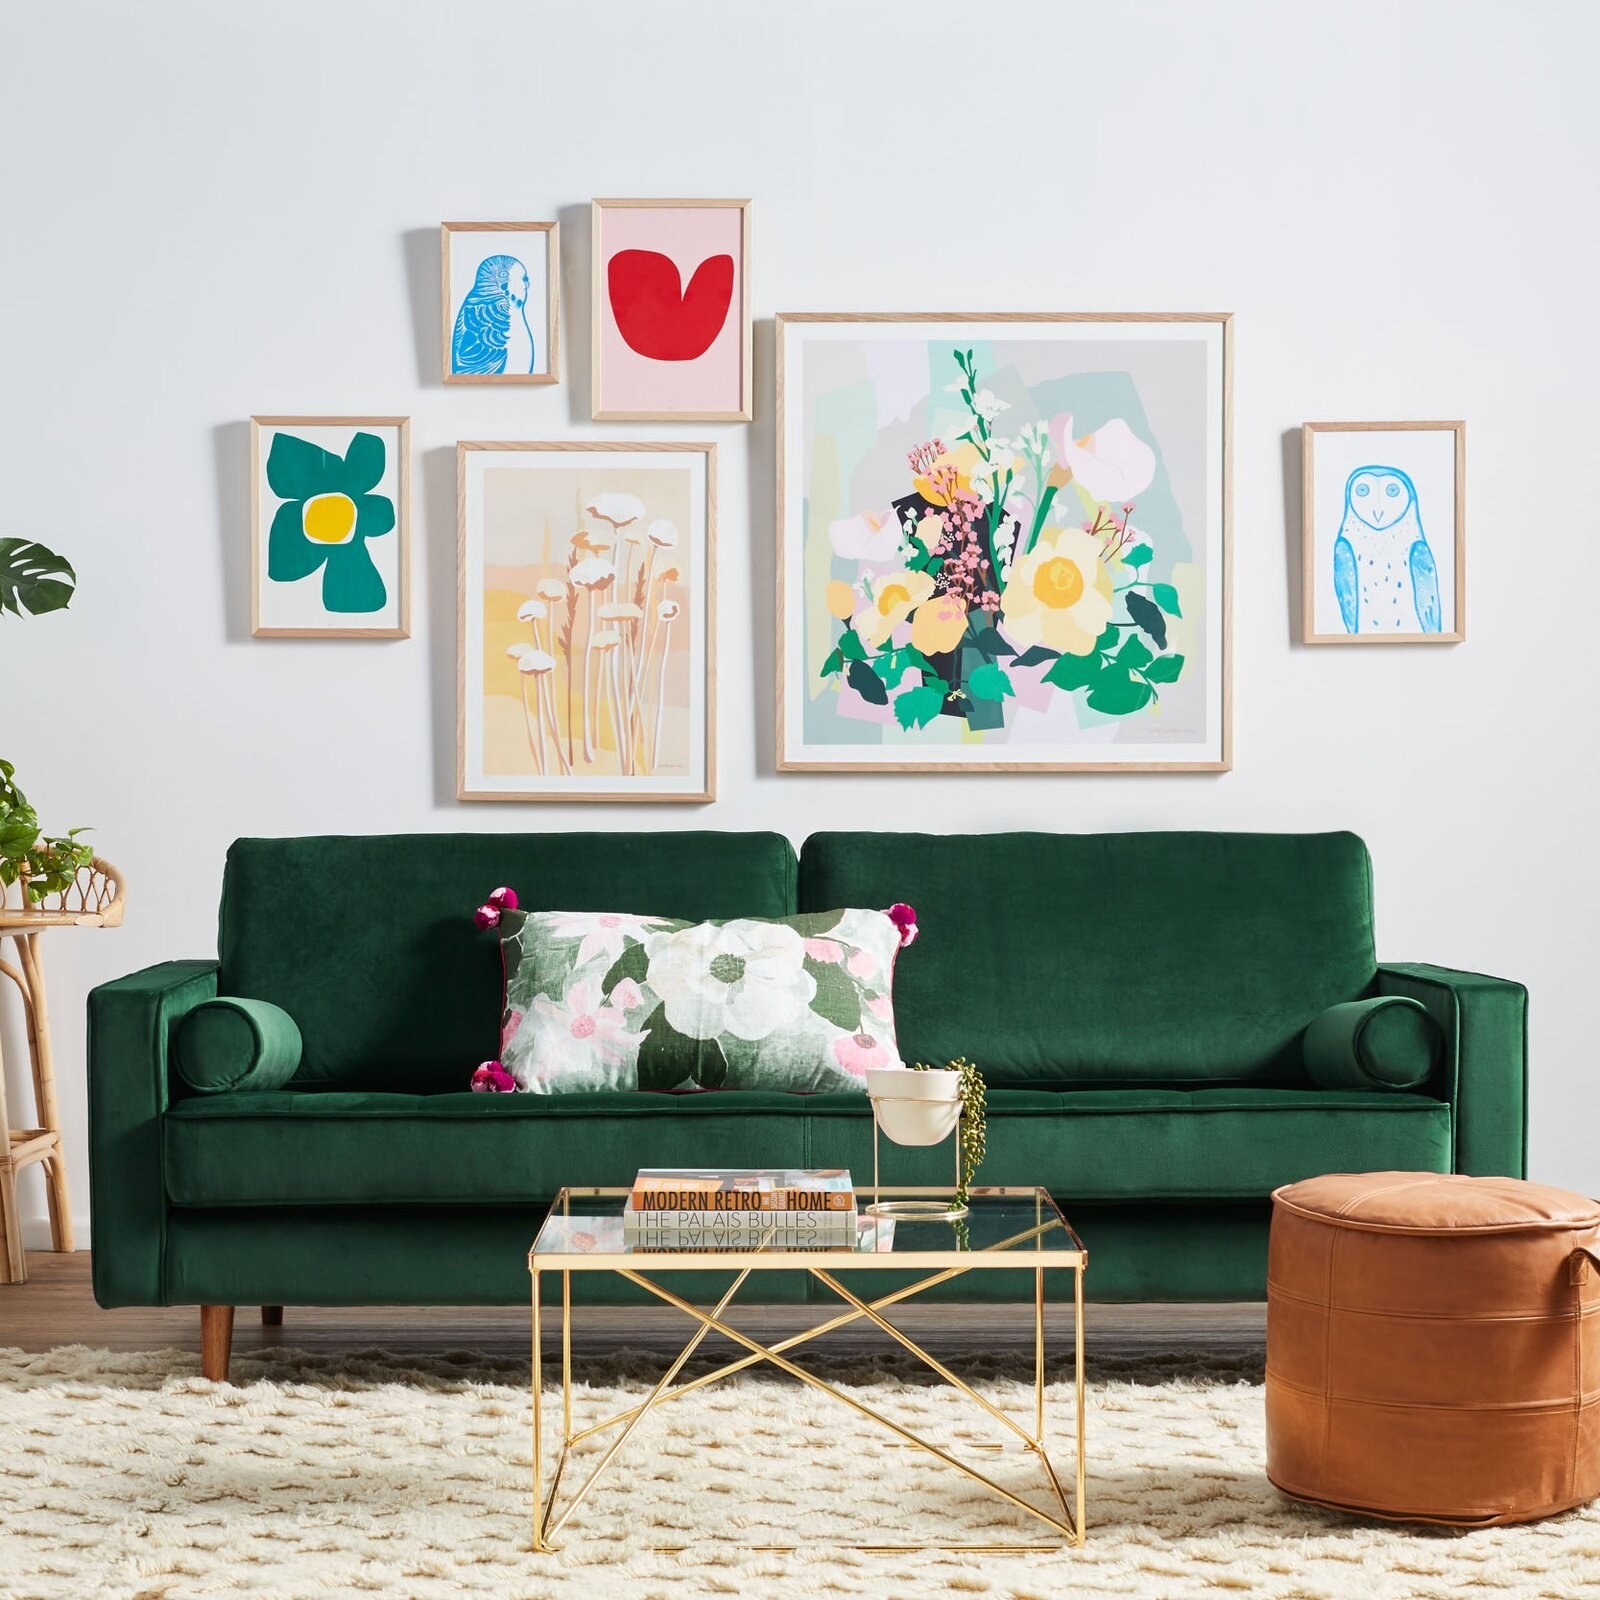 The couch in green styled in a living room